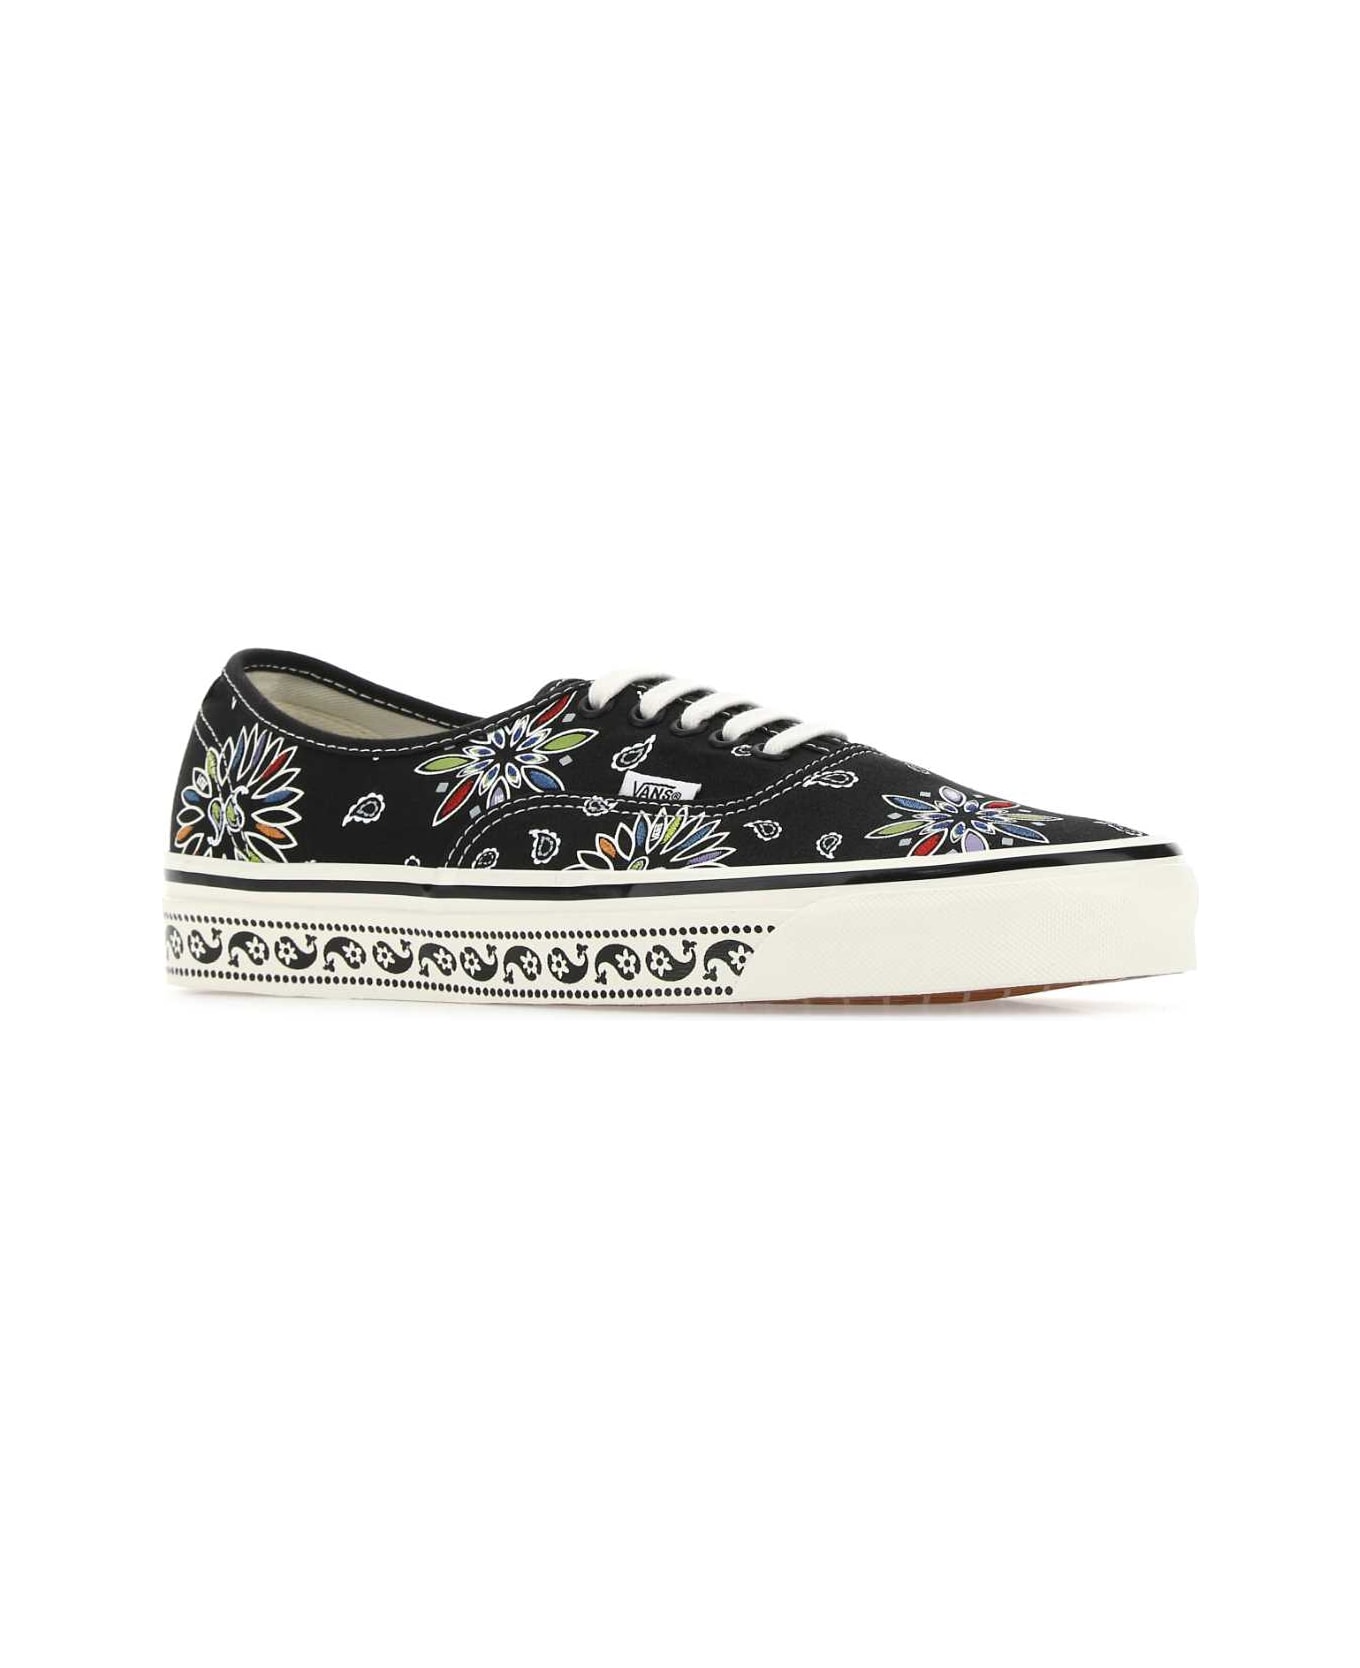 Vans Printed Canvas Anaheim Factory Authentic 44 Sneakers - 9GG1